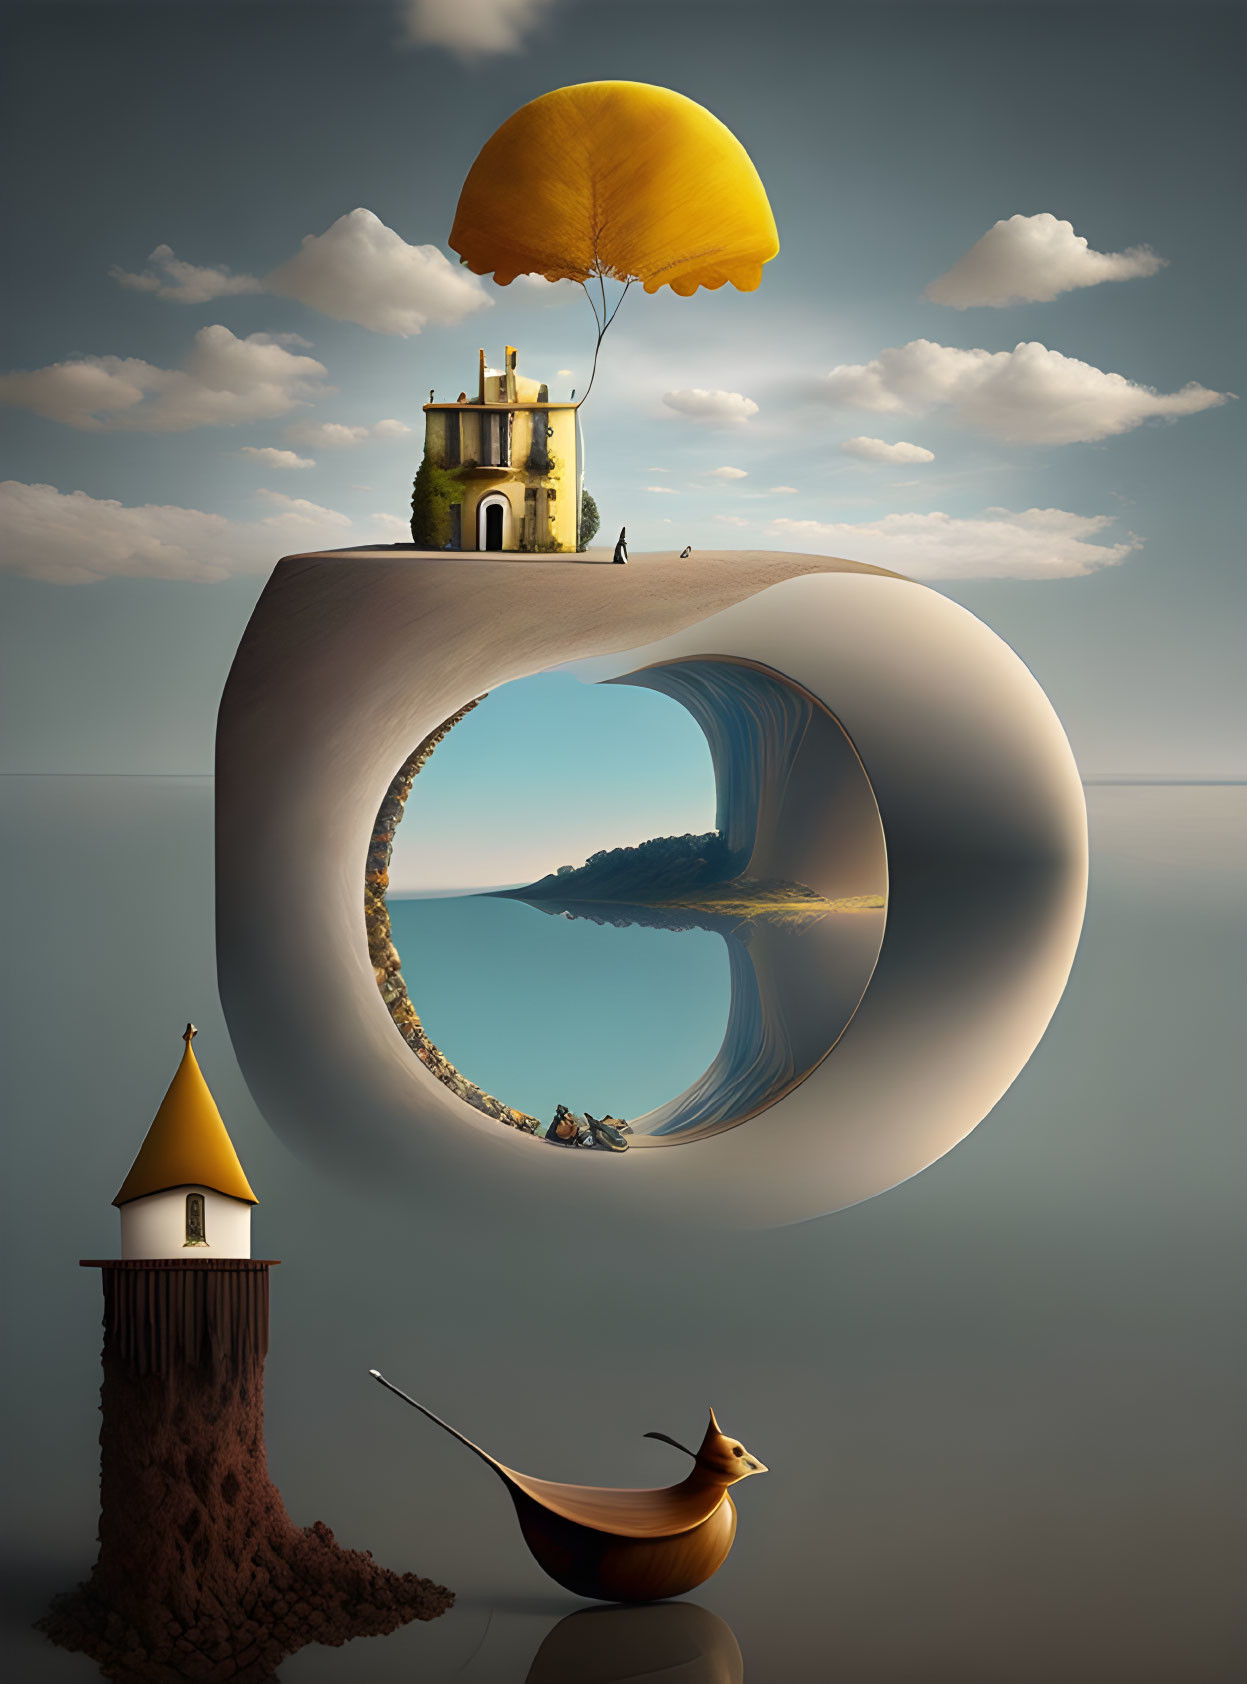 Surreal image of ring with beach, floating castle, tower, and violin boat